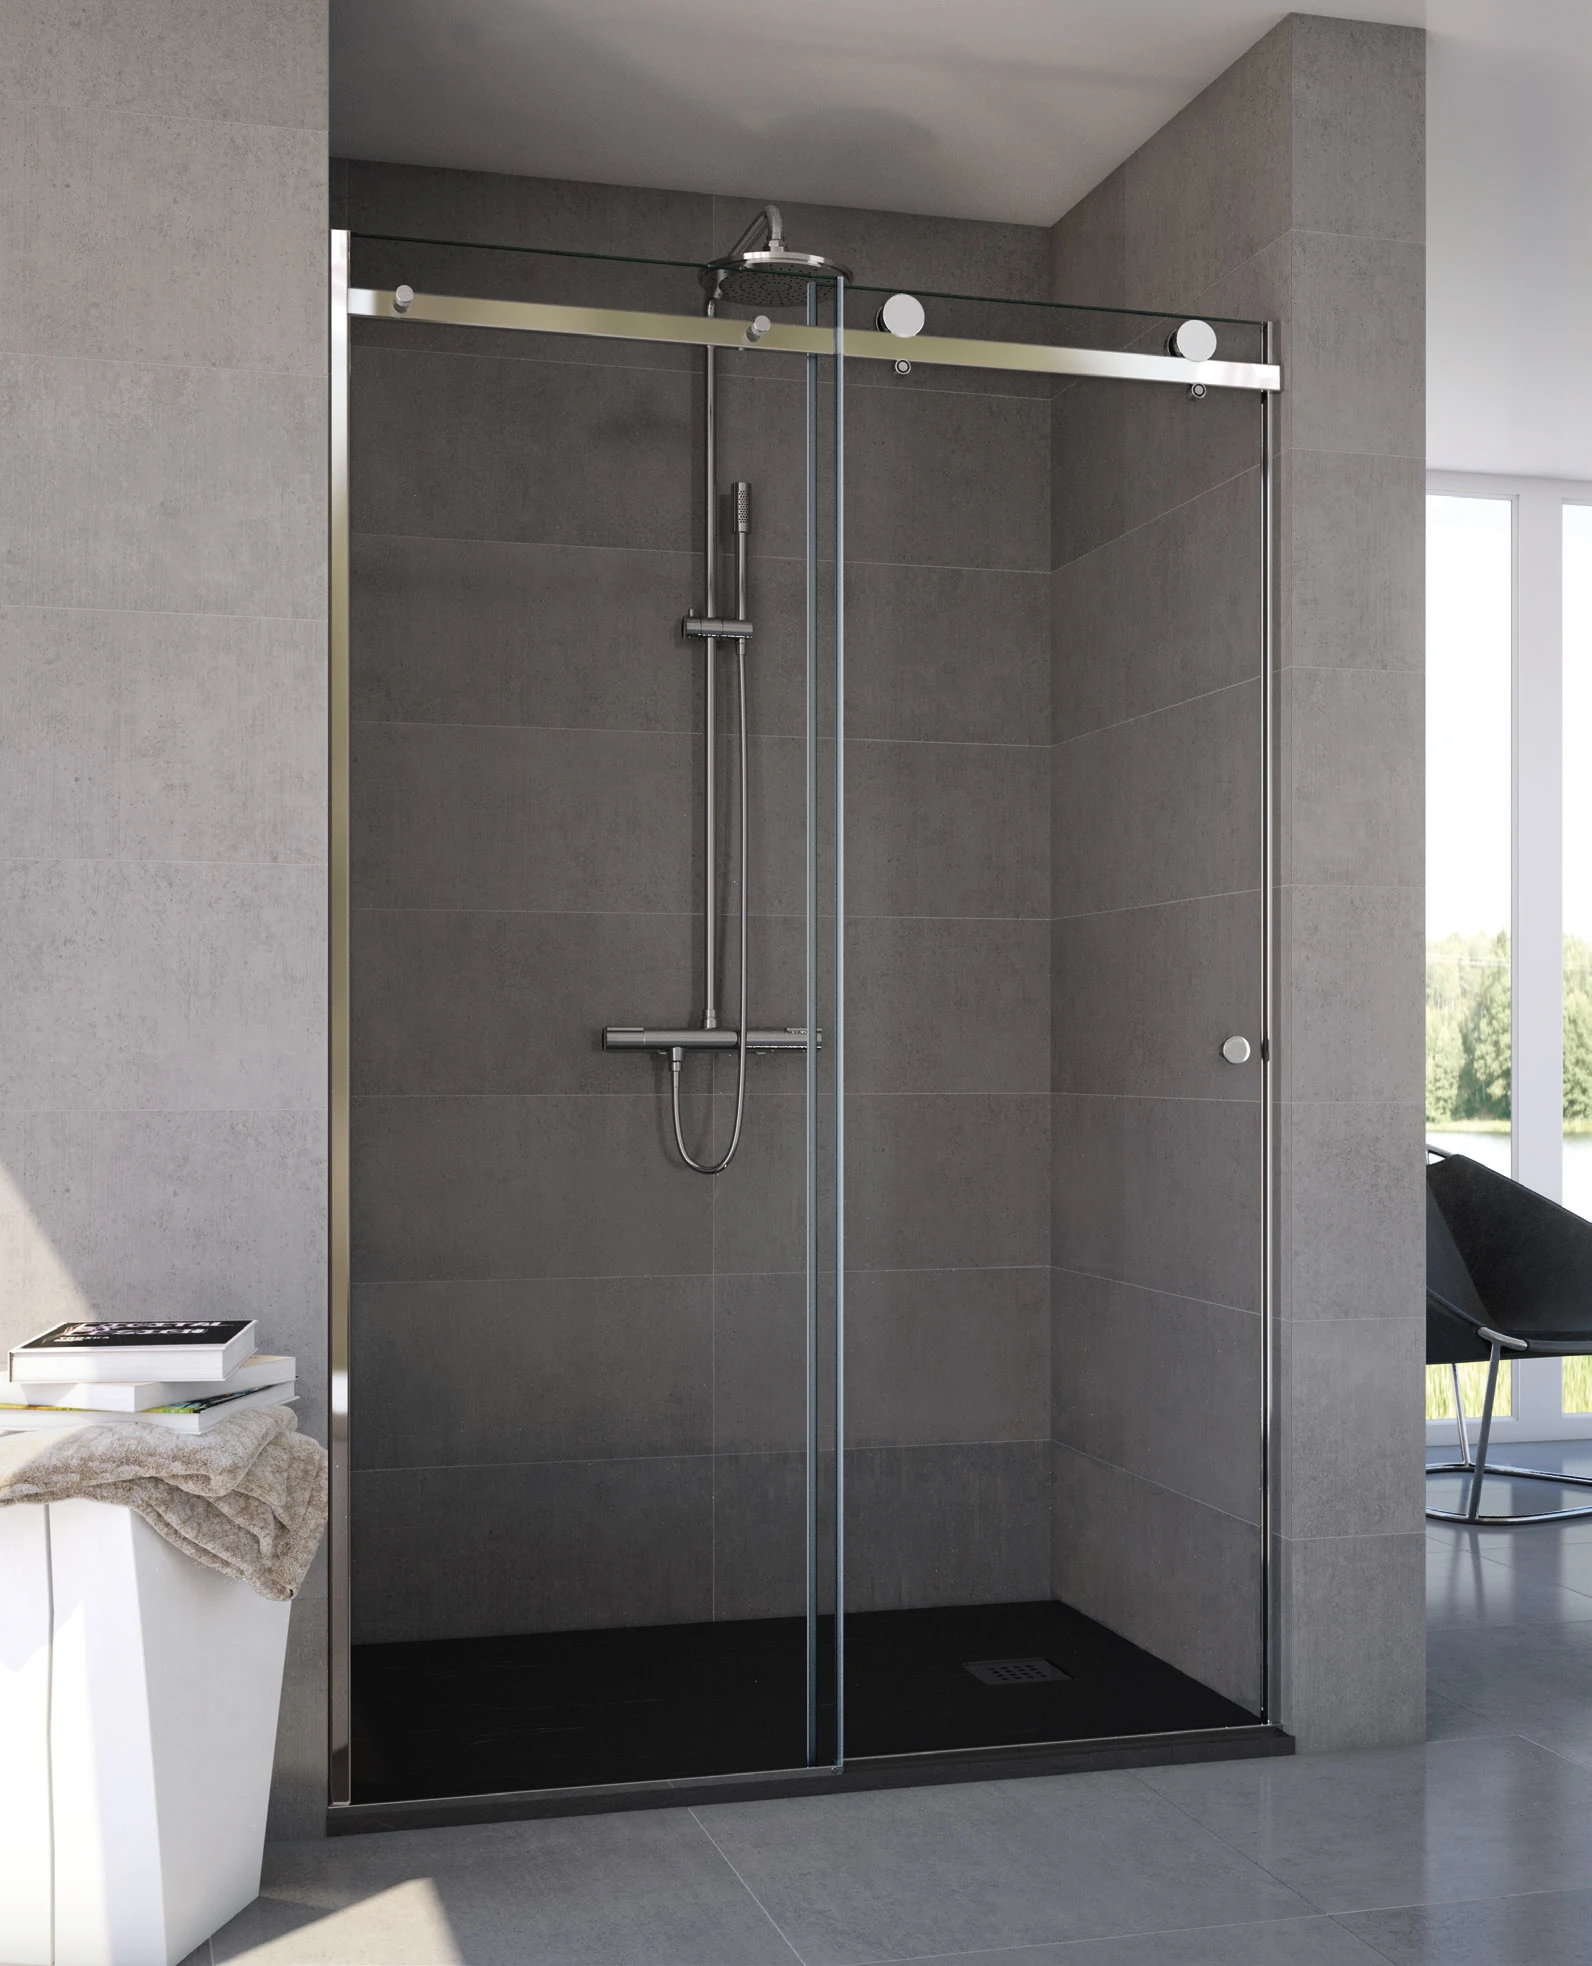 Hot Sell 2020 New Products Modern Sliding Shower Doors 8mm Lowes Shower Enclosures Buy Lowes Shower Enclosures Aluminium Profiles For Shower Enclosures Corner Shower Enclosure Product On Alibaba Com